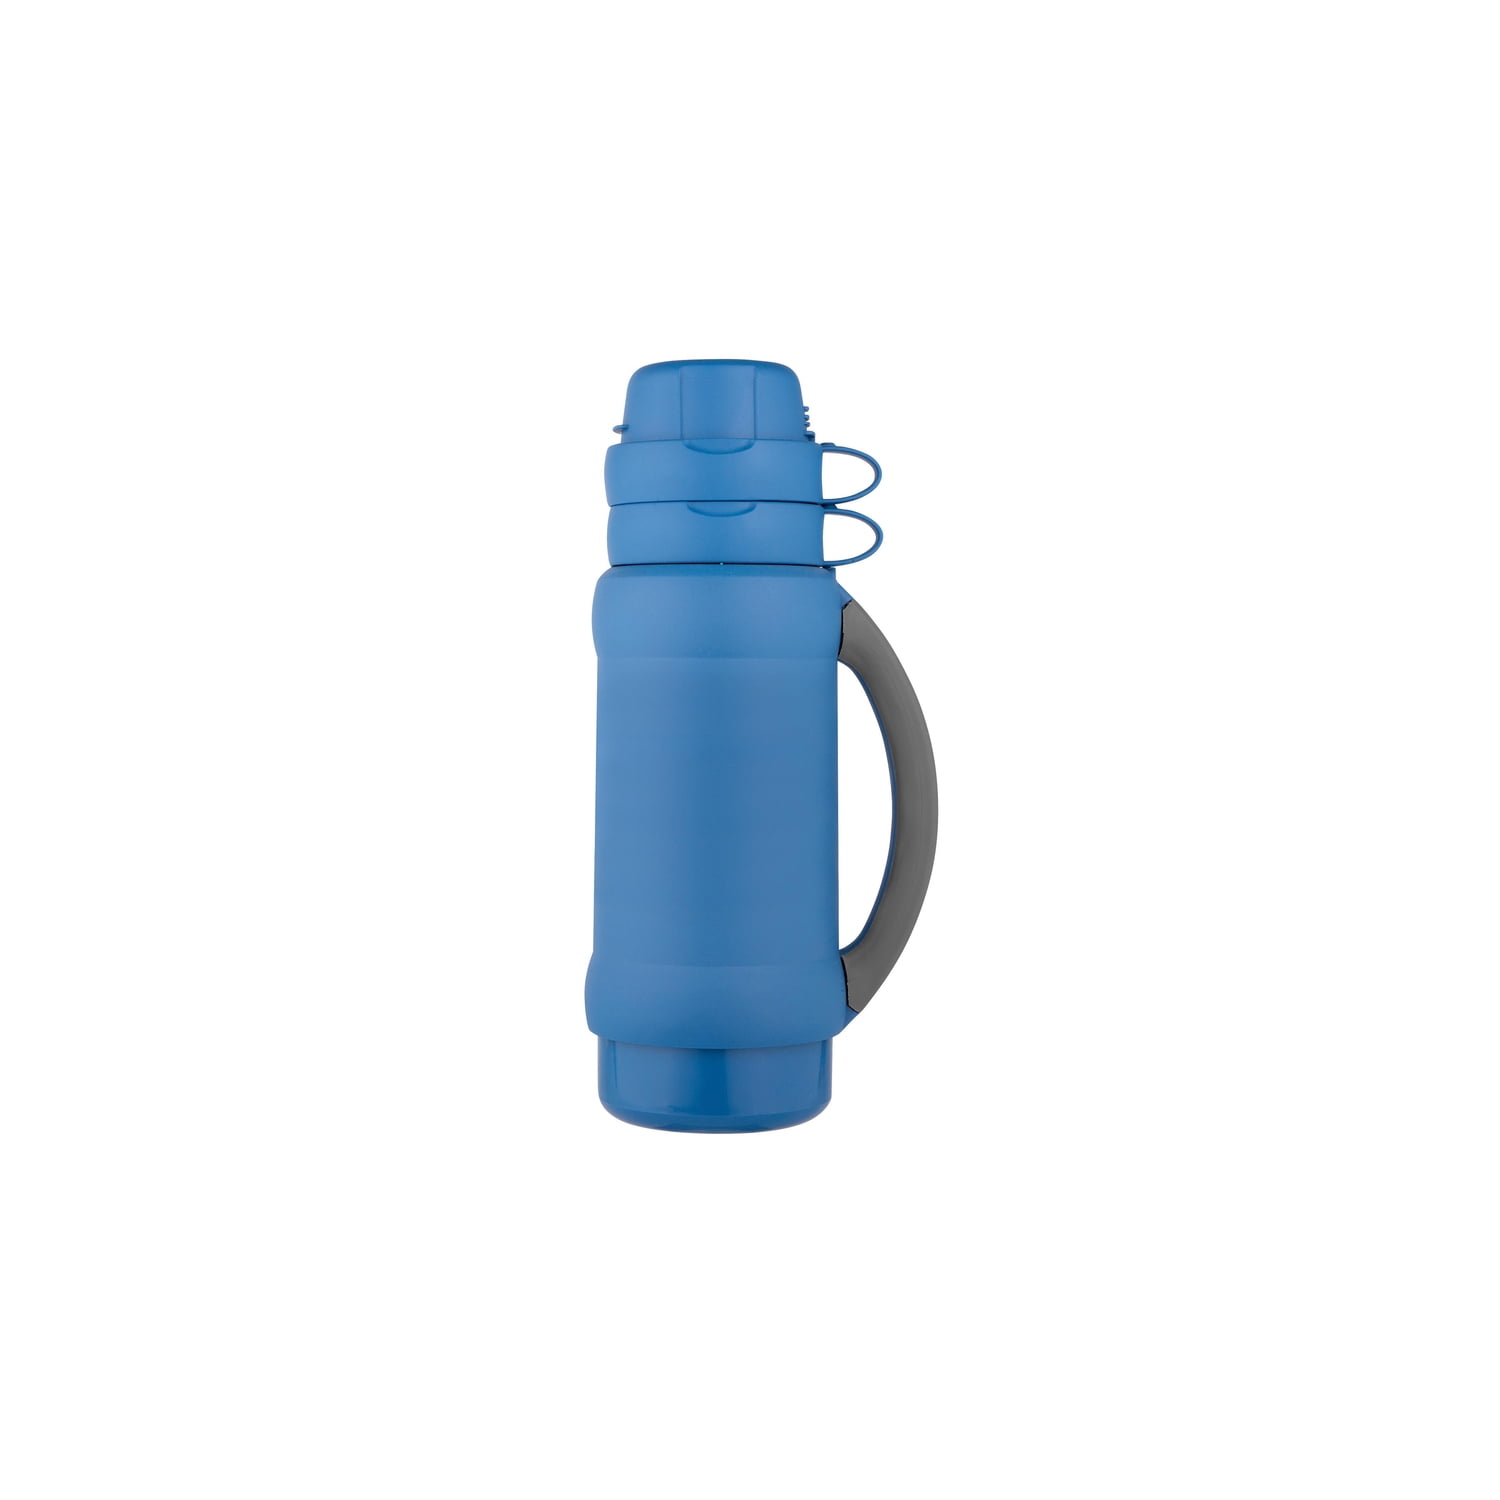 Thermos Add-A-Cup Glass Beverage Bottle 